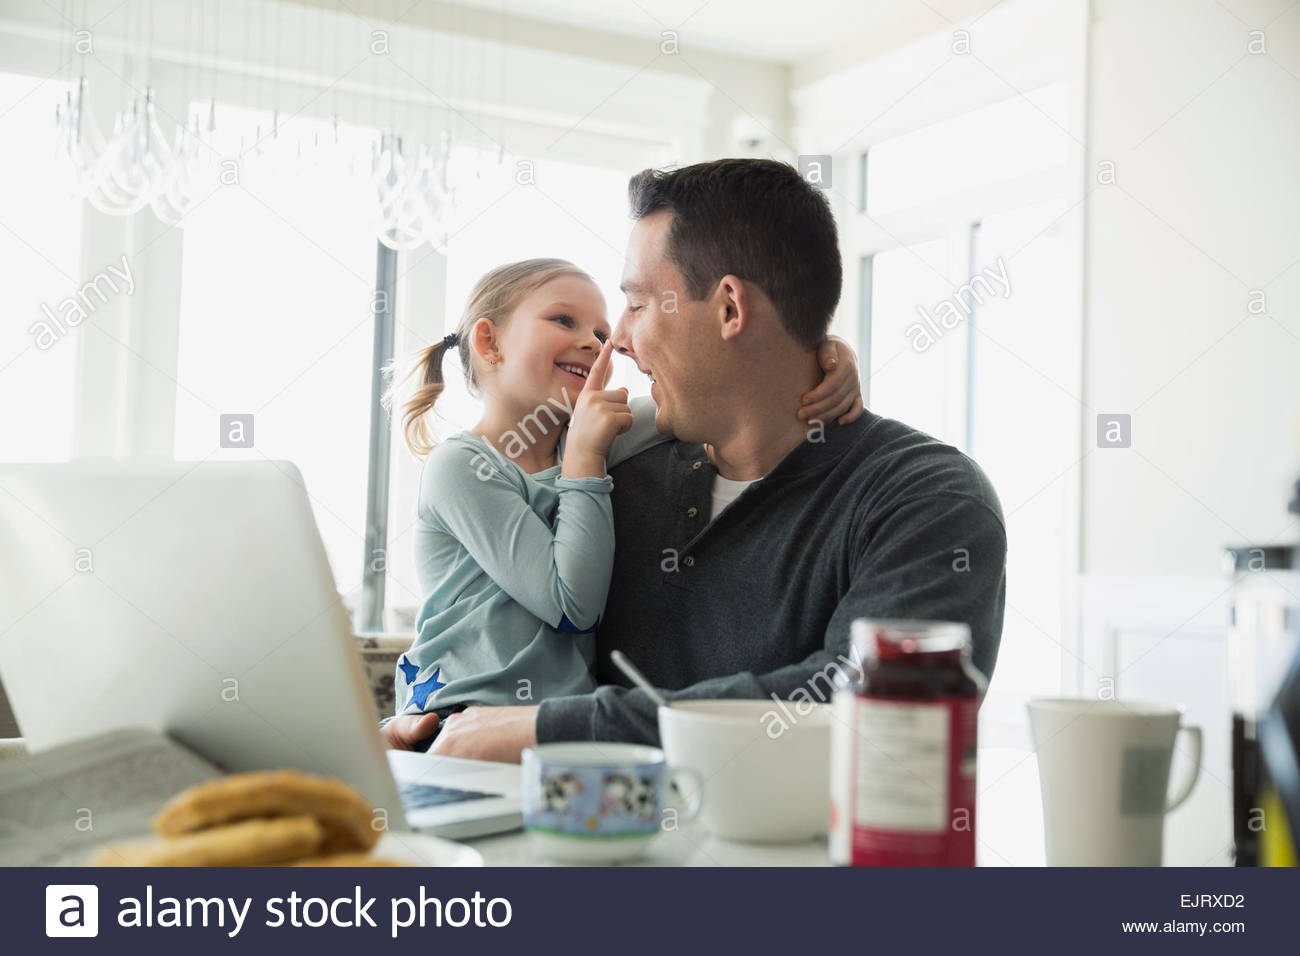 Affectionate daughter touching fathers nose in kitchen Stock Photo